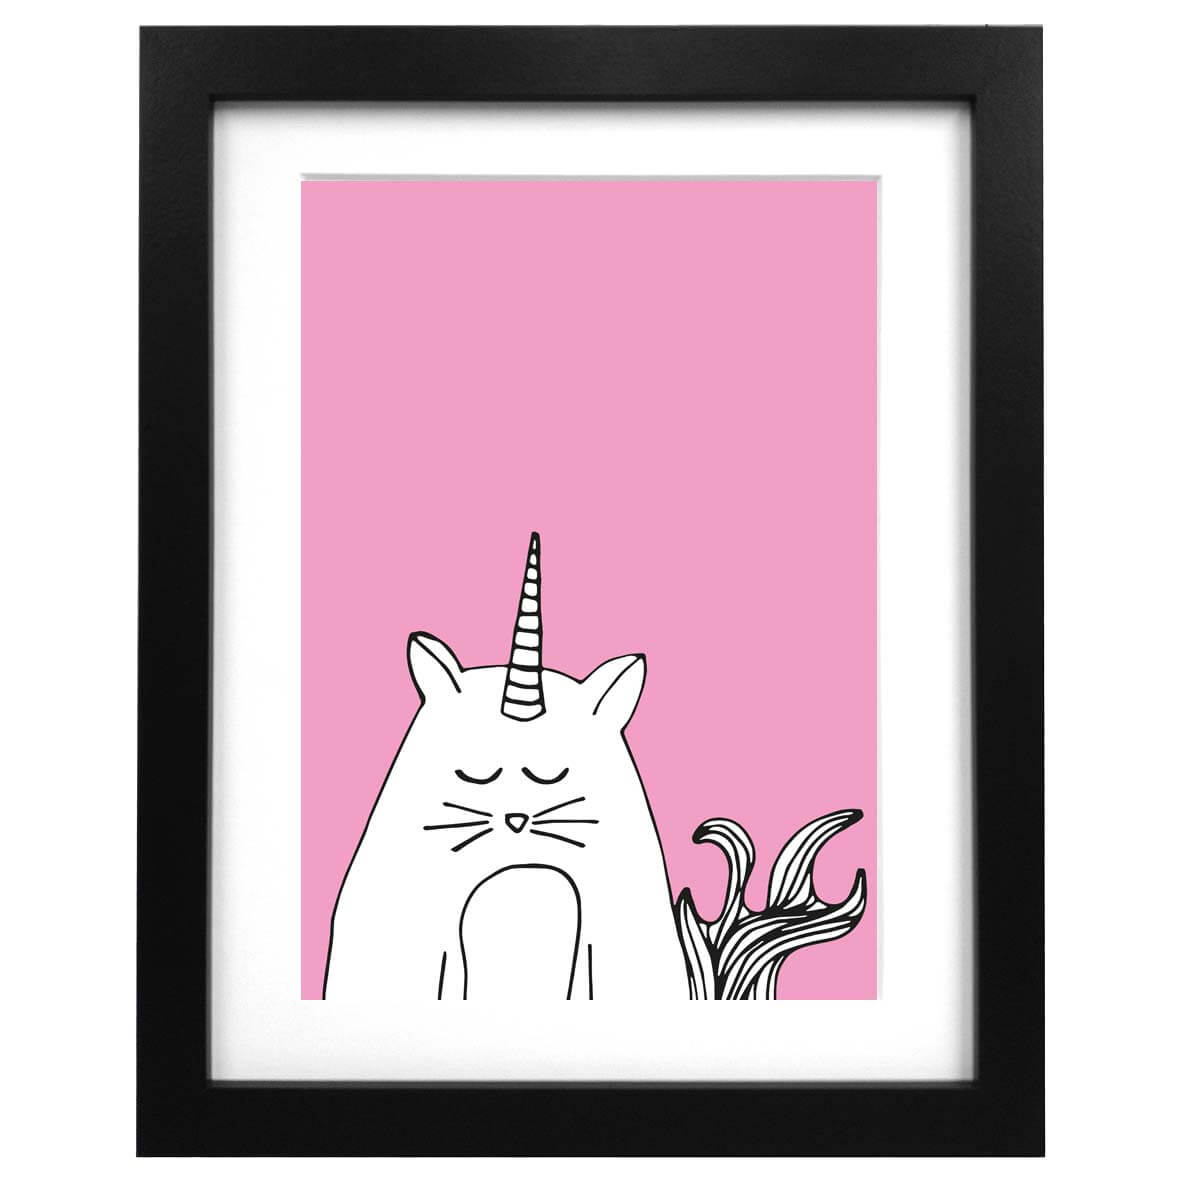 A3 pink cat art print with an illustration of a unicorn cat 